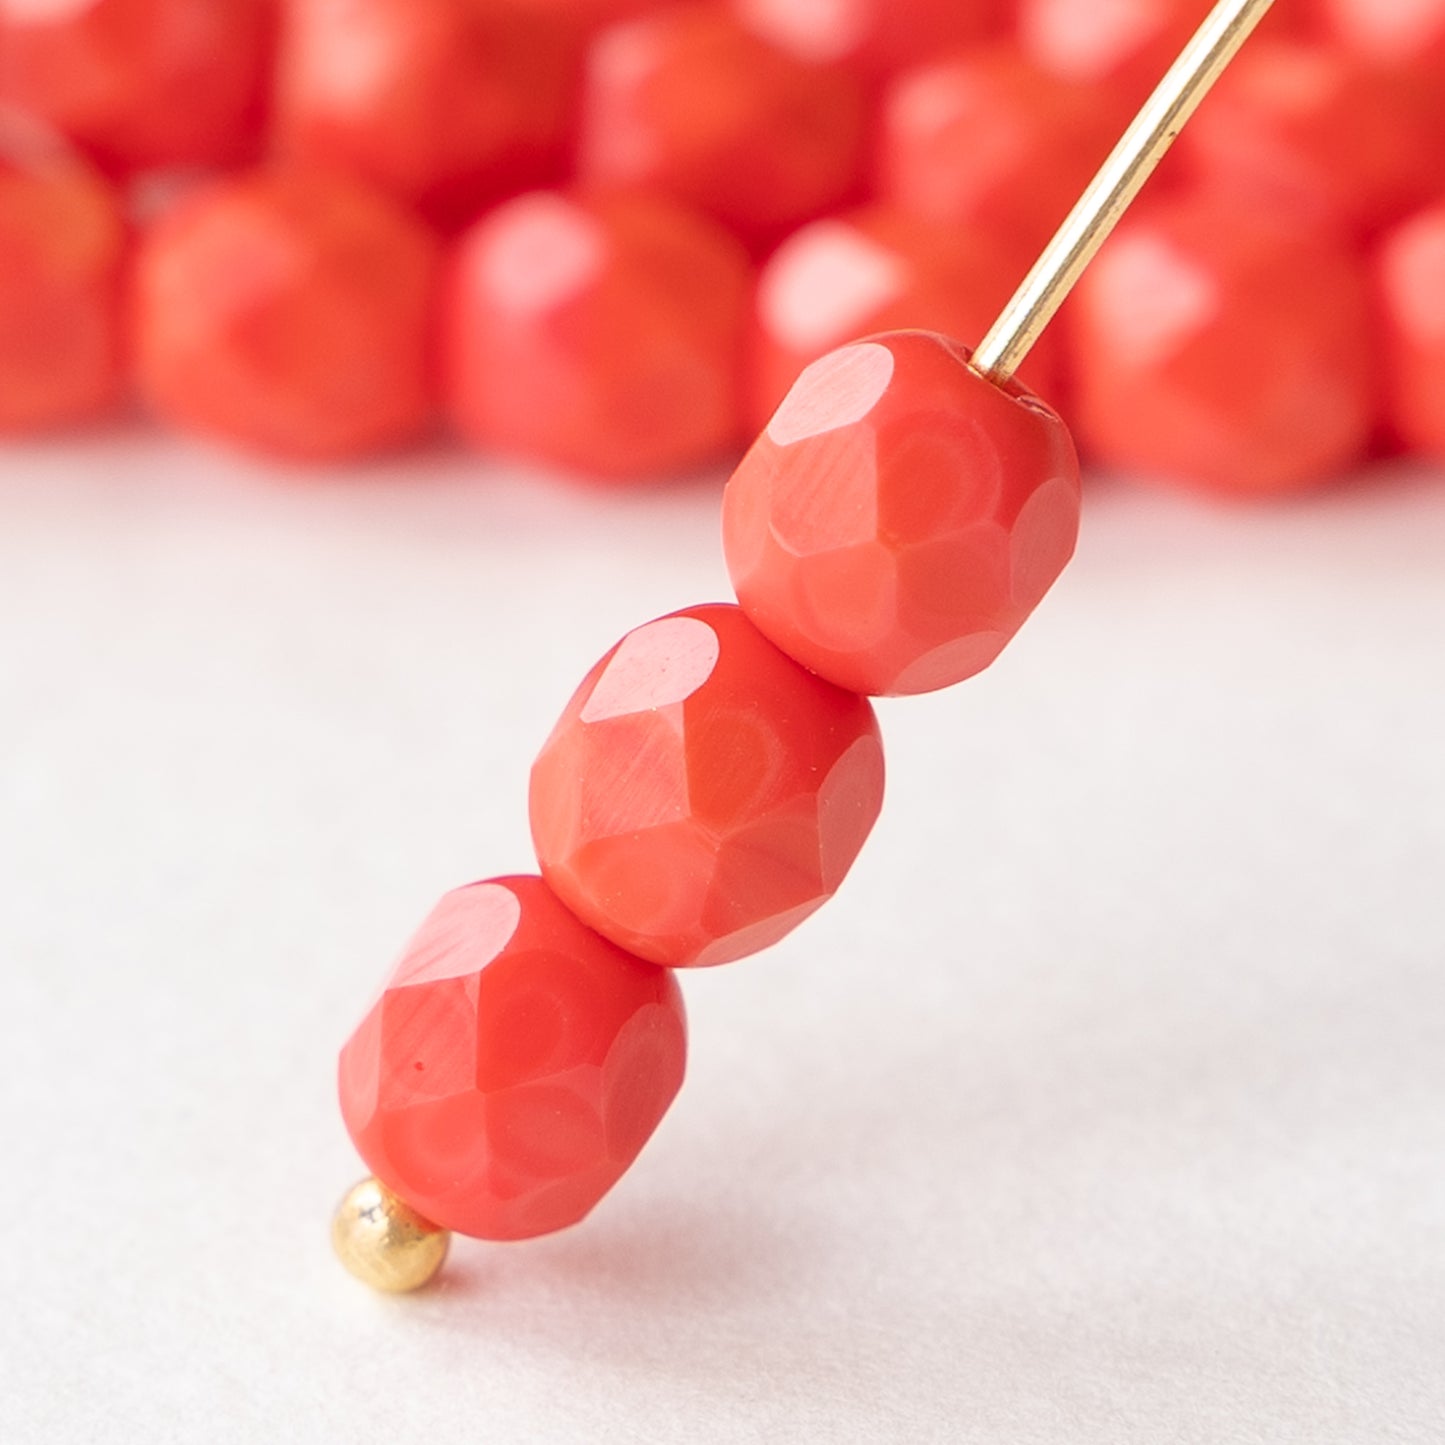 6mm Round Firepolished Beads - Opaque Coral Red - 25 beads